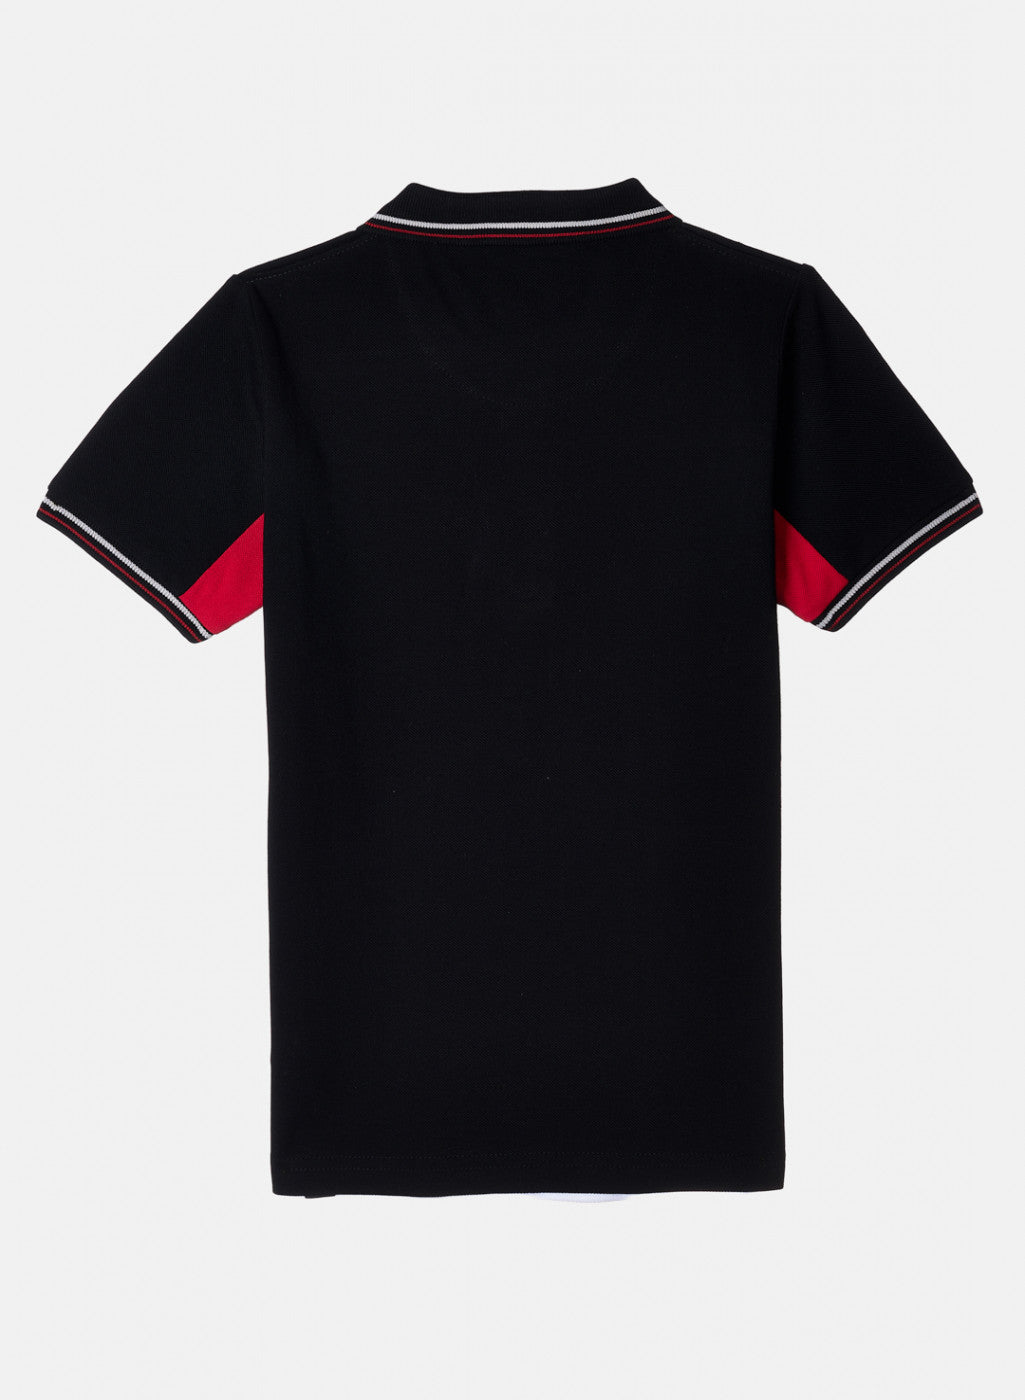 Boys Multi Color Embroidered T-Shirt